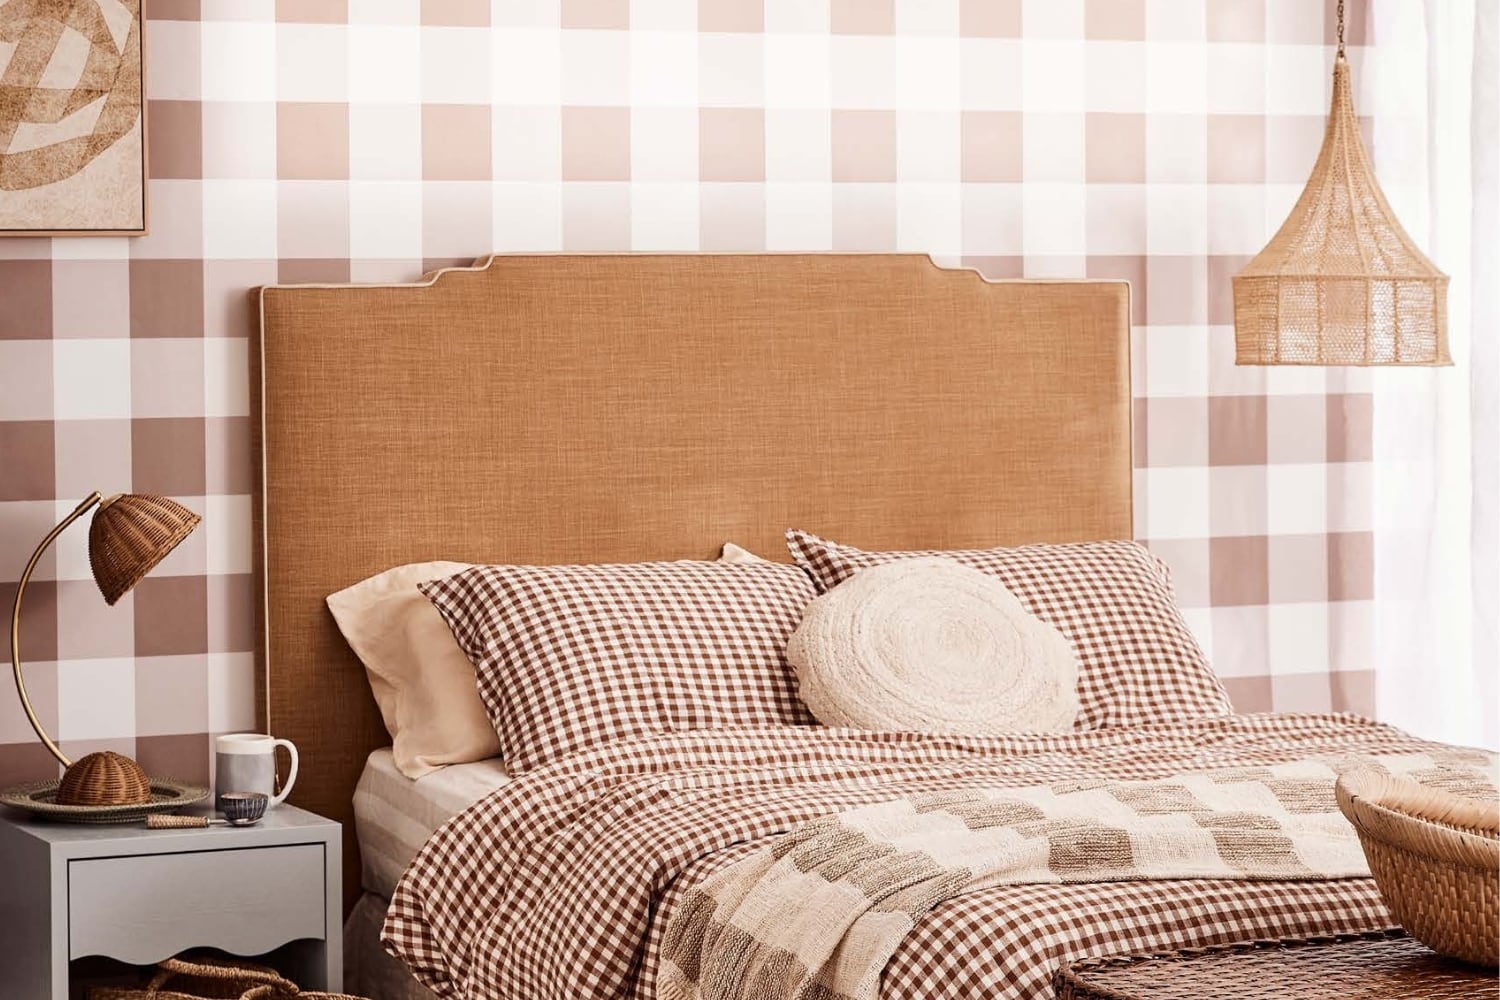 Tan linen bedhead design with gingham wallpaper for Home Beautiful Magazine